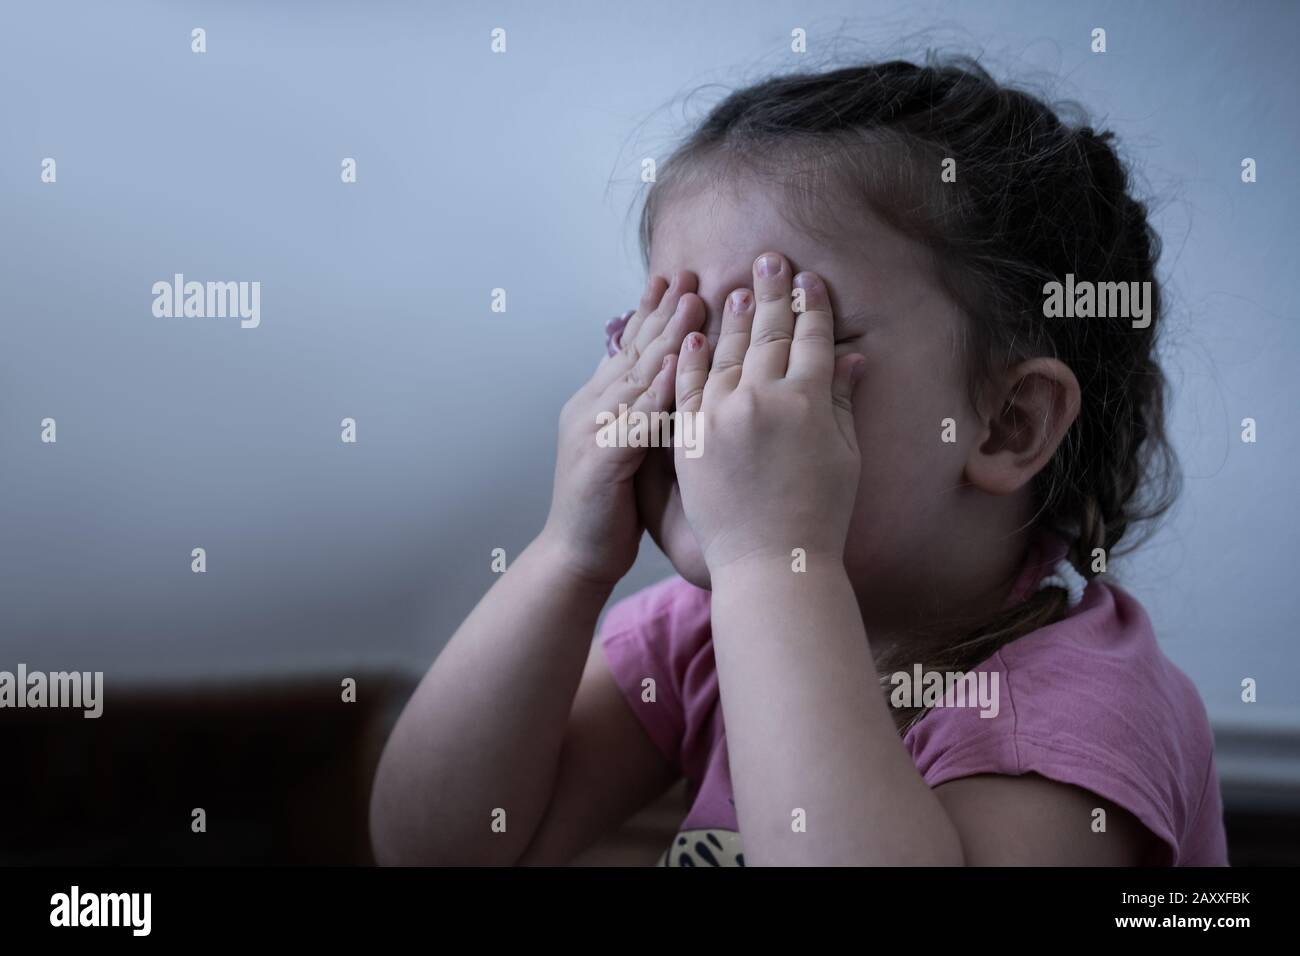 Little Girl Crying. Very Sad Girl Covering Her Eyes Stock Photo ...